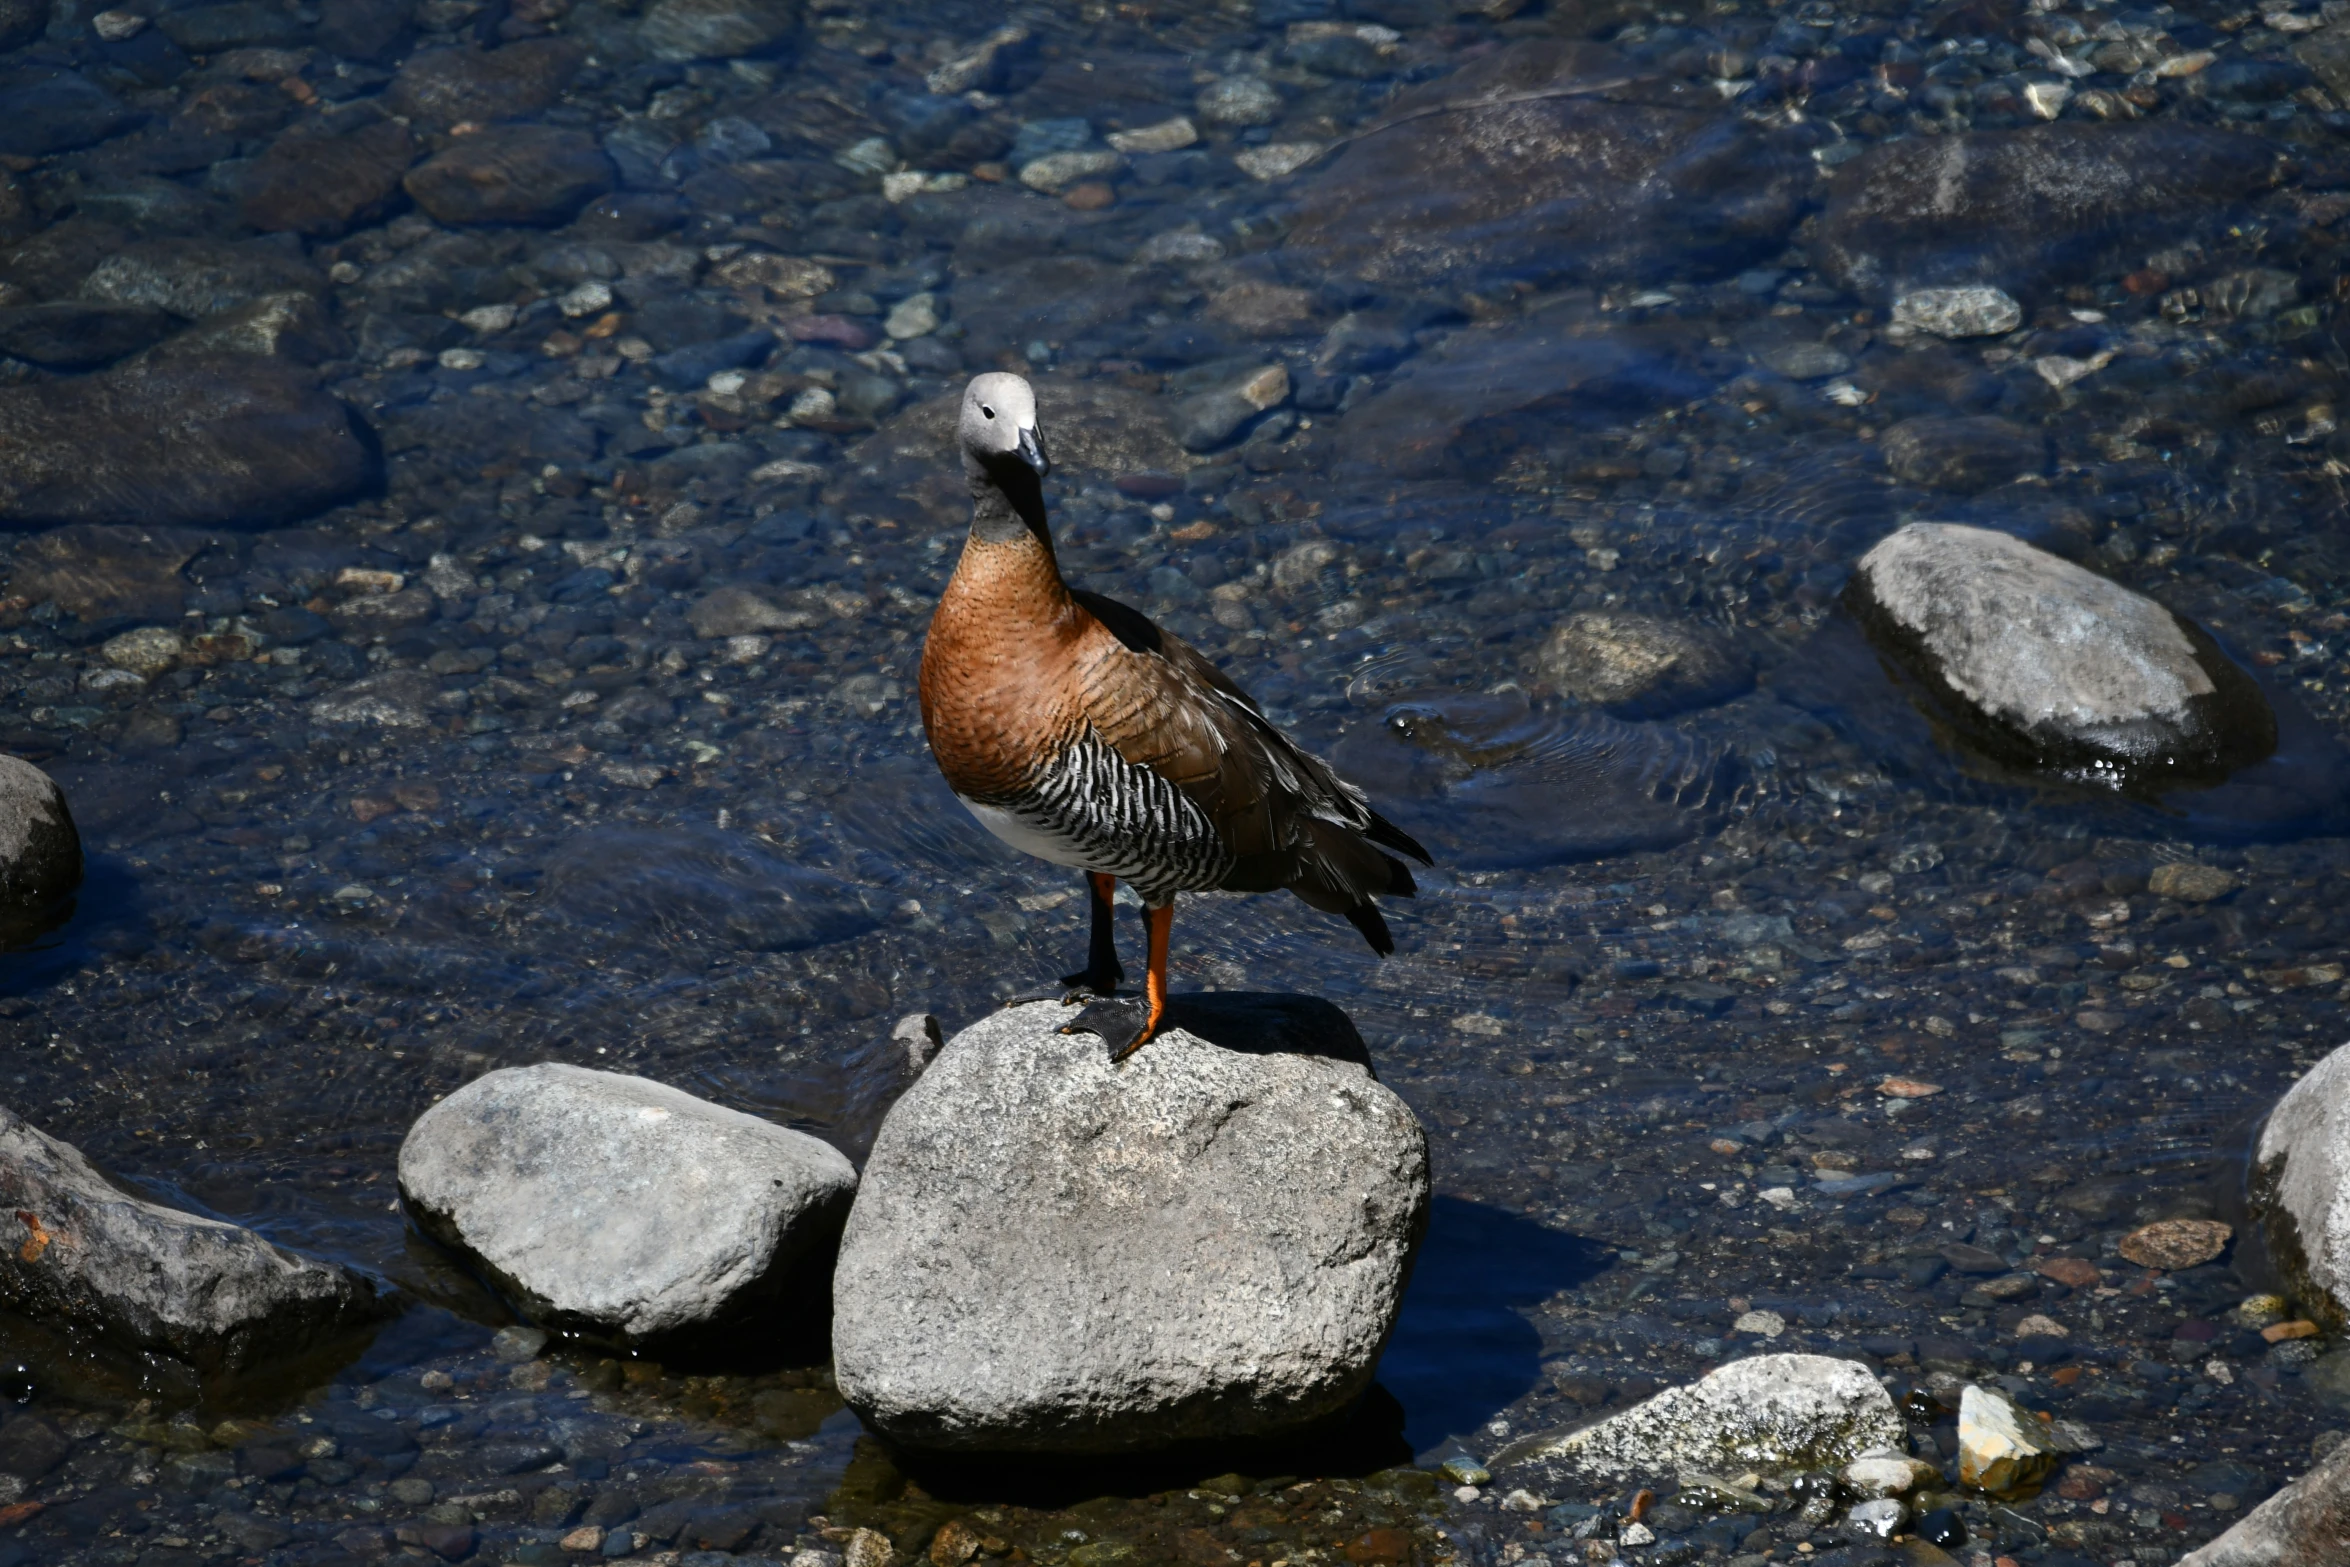 a bird perched on rocks in a body of water